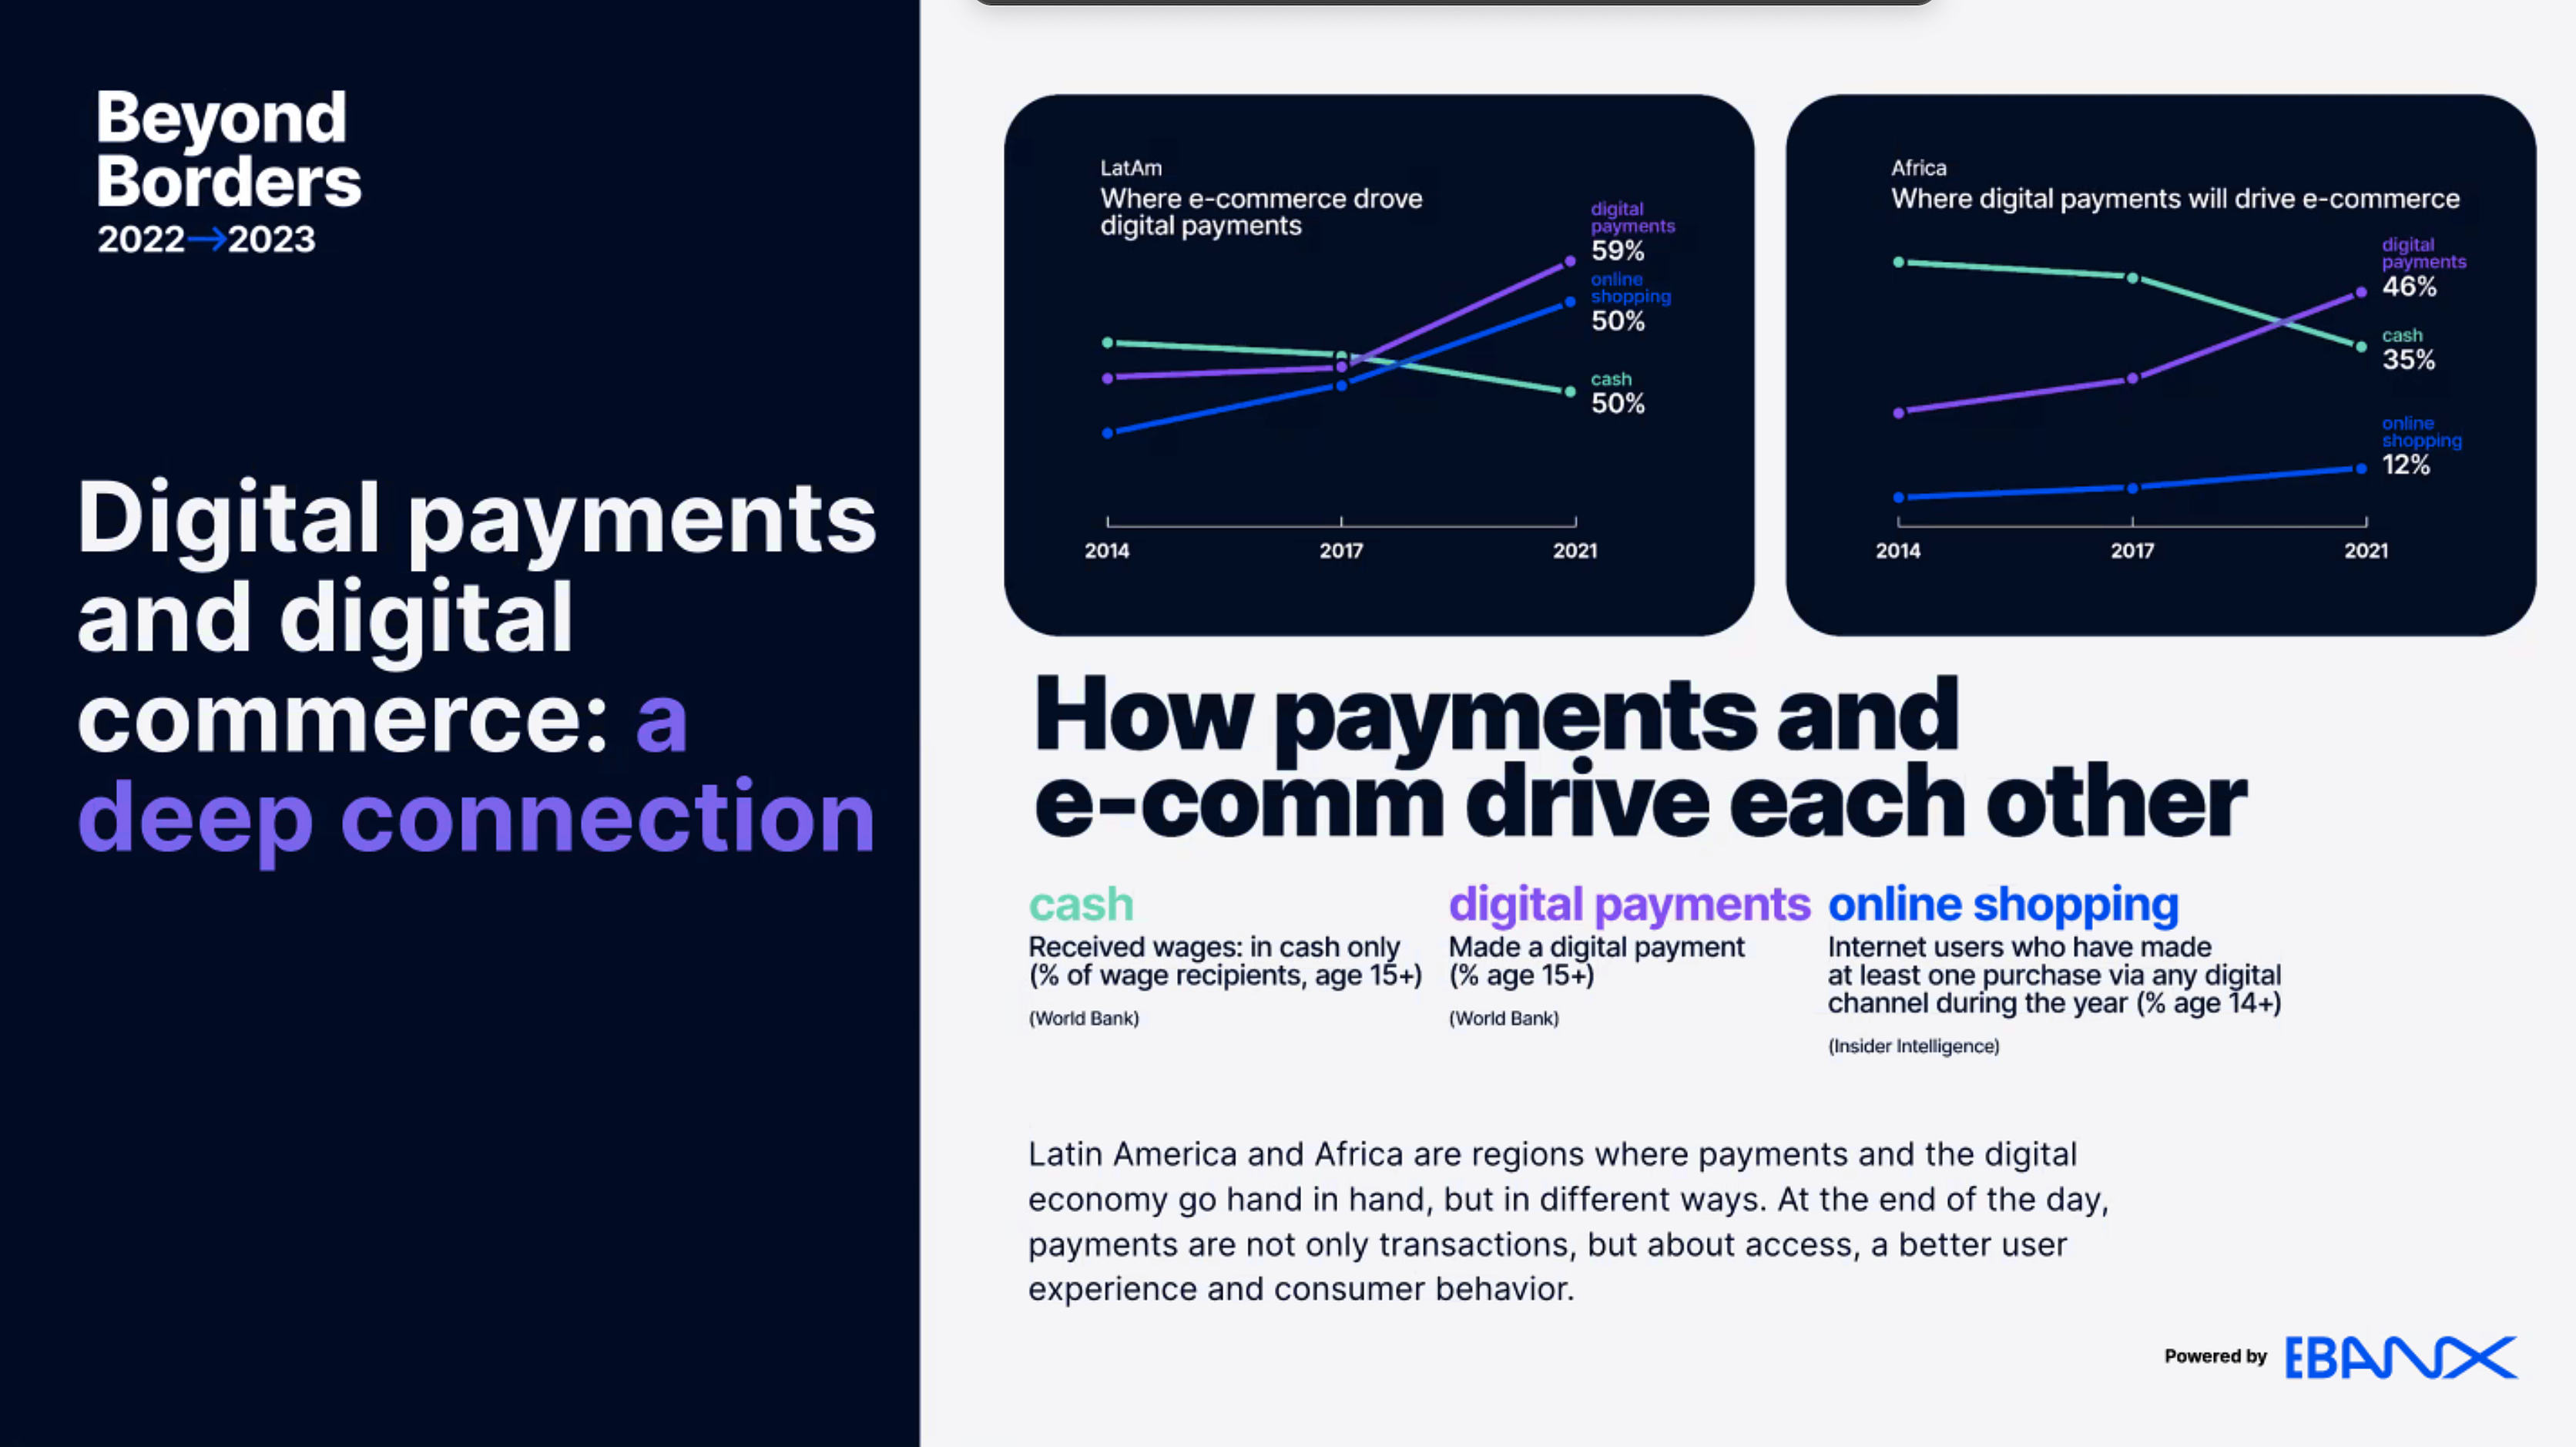 How payments and e-commerce drive each other